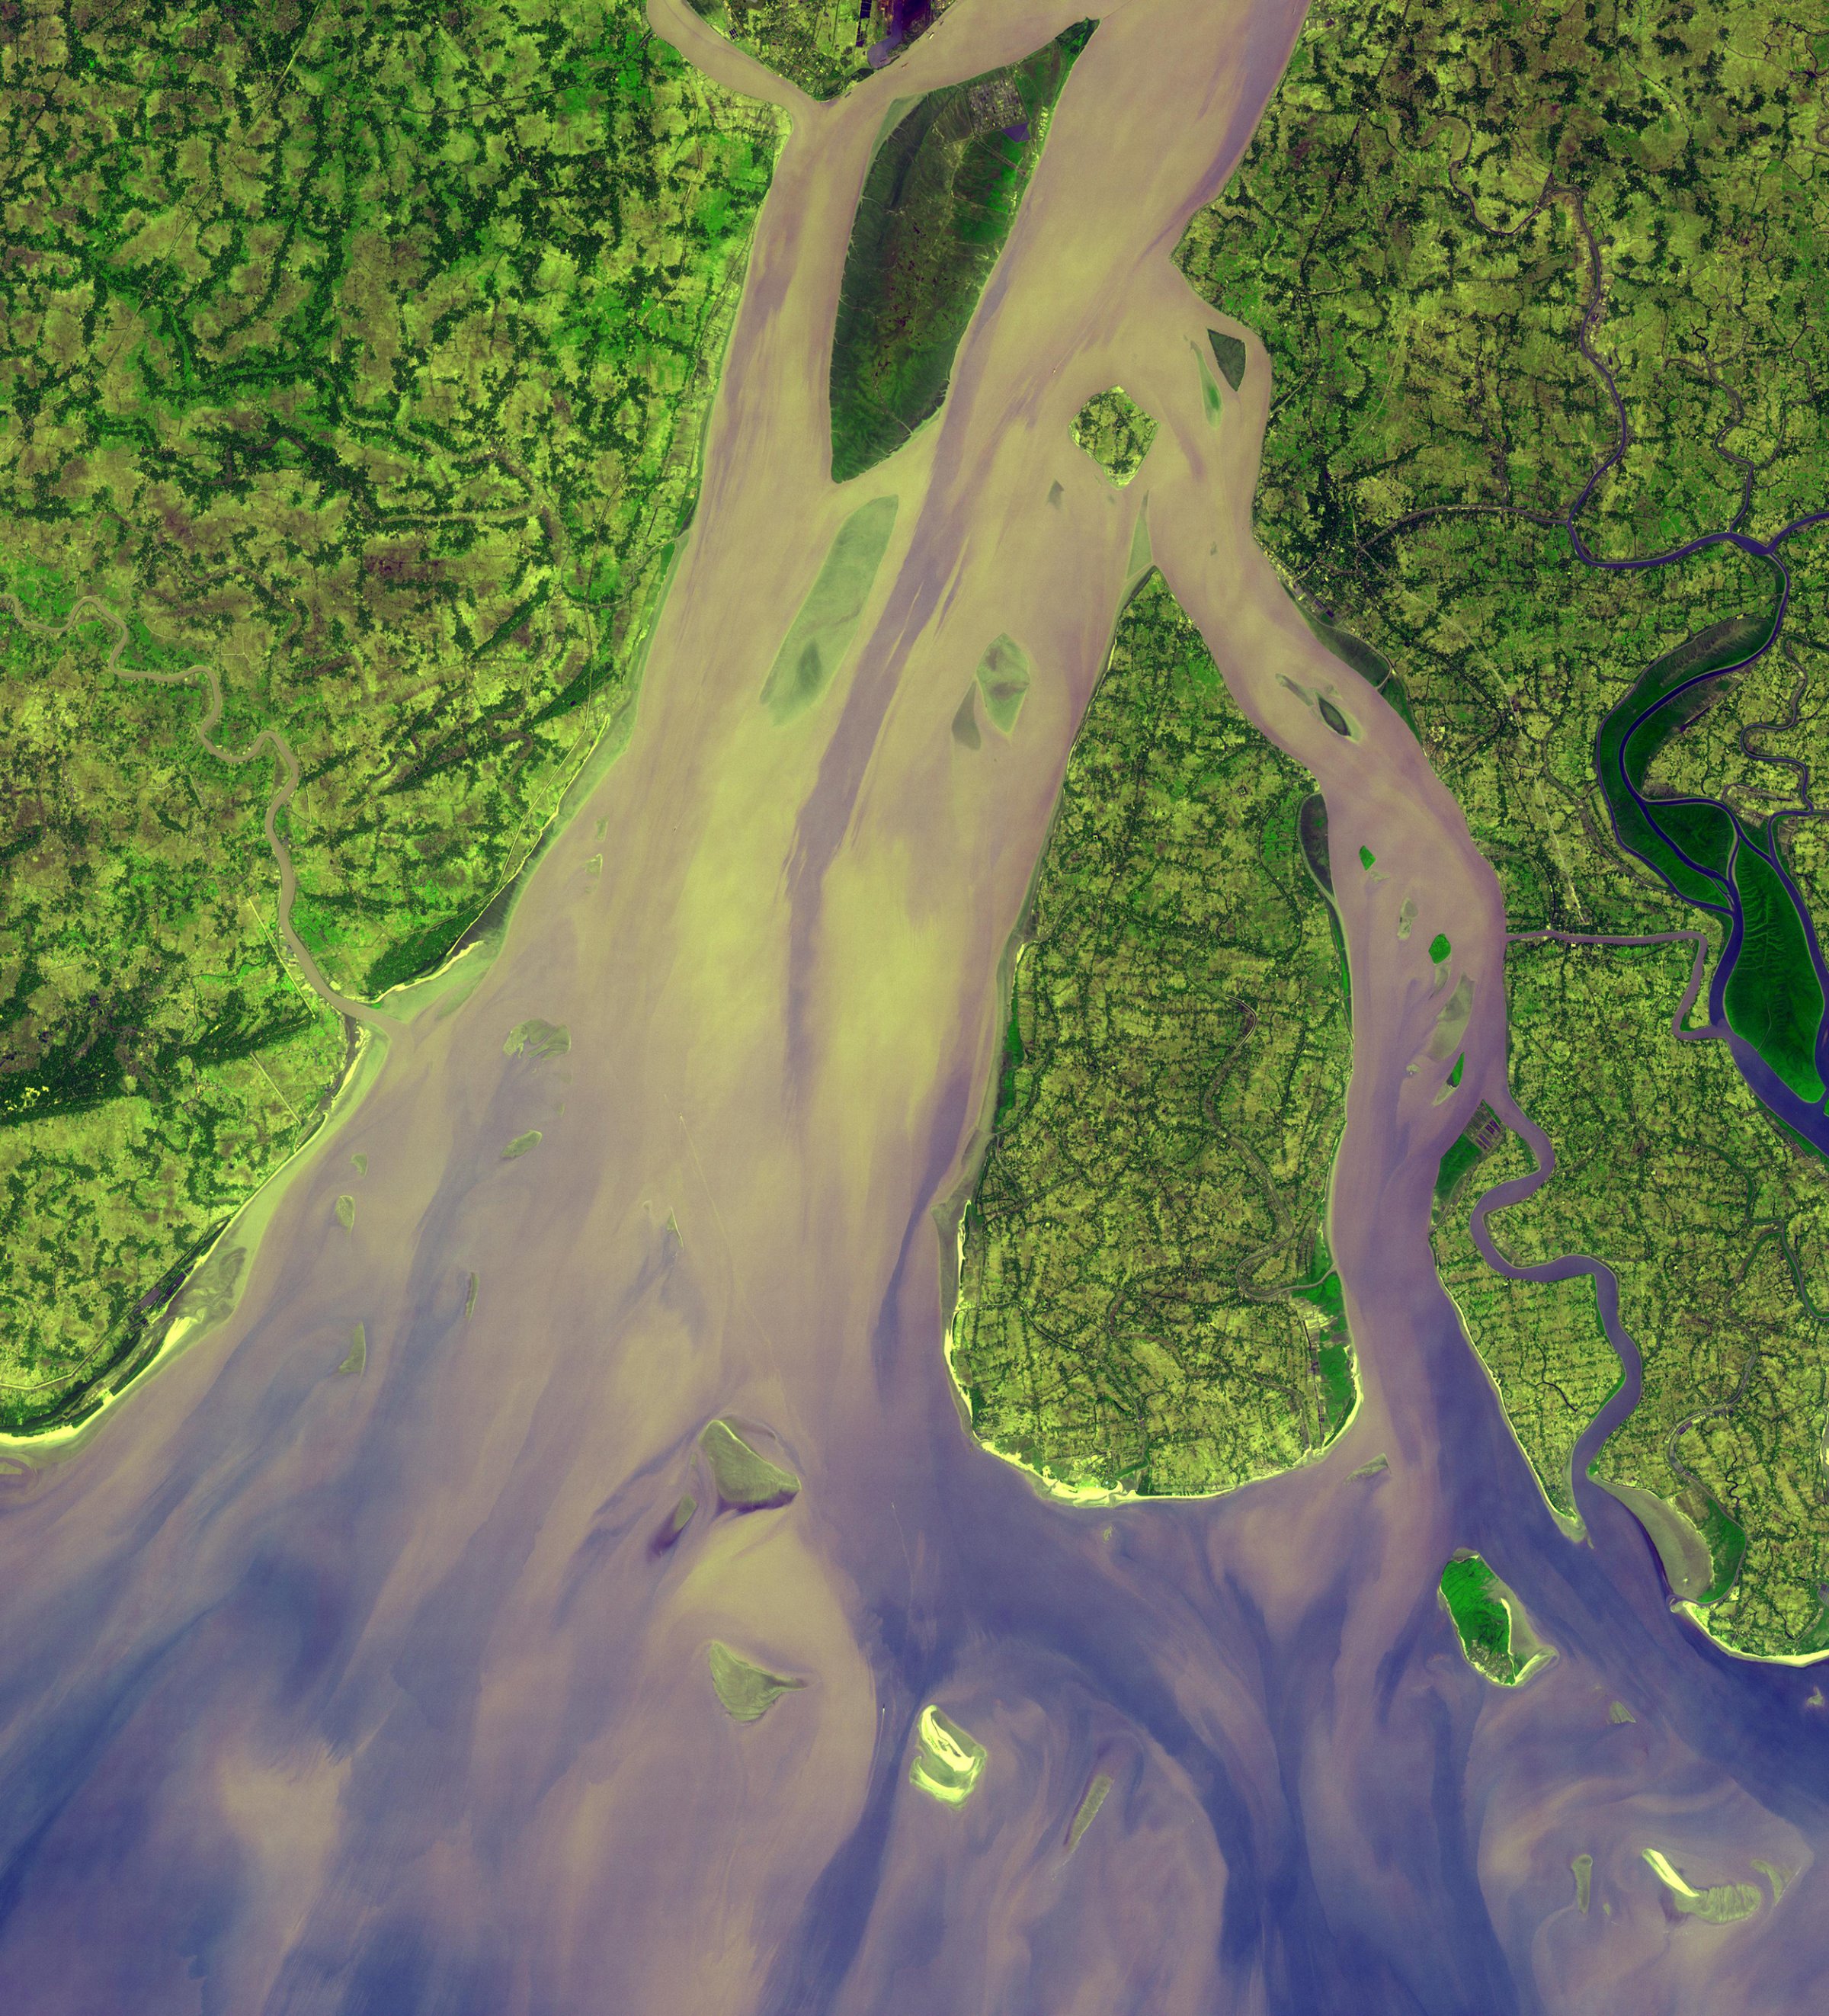 High sediment load in the Hugli River Delta, India, is evident by the light tan colors in the water, particularly downstream from off-shore islands. The deep green colors of some of these islands are mangrove swamps. Image acquired on Jan. 6, 2005.